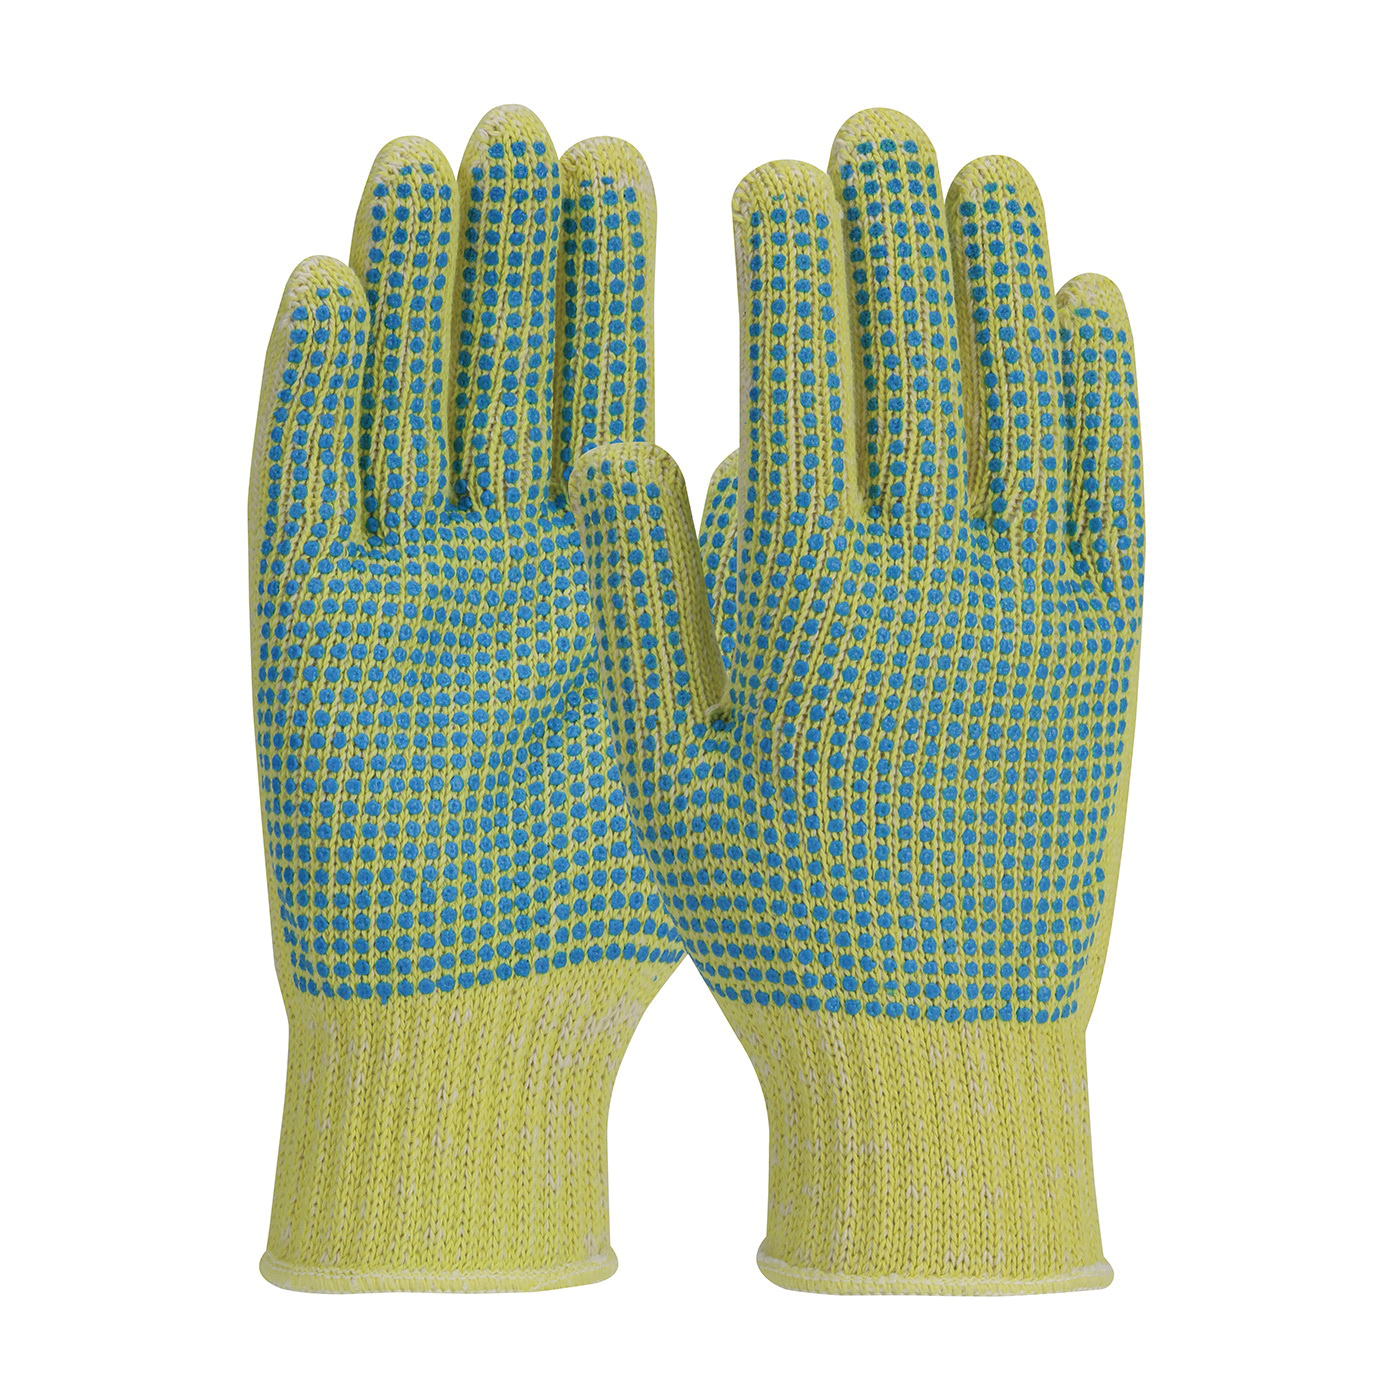 PIP® Kut-Gard® 08-K252 Medium Weight Unisex Cut Resistant Gloves, 2-Sided PVC Dots Coating, Cotton/Kevlar®, Elastic Knit Wrist Cuff, Resists: Abrasion and Cut, ANSI Cut-Resistance Level: A2